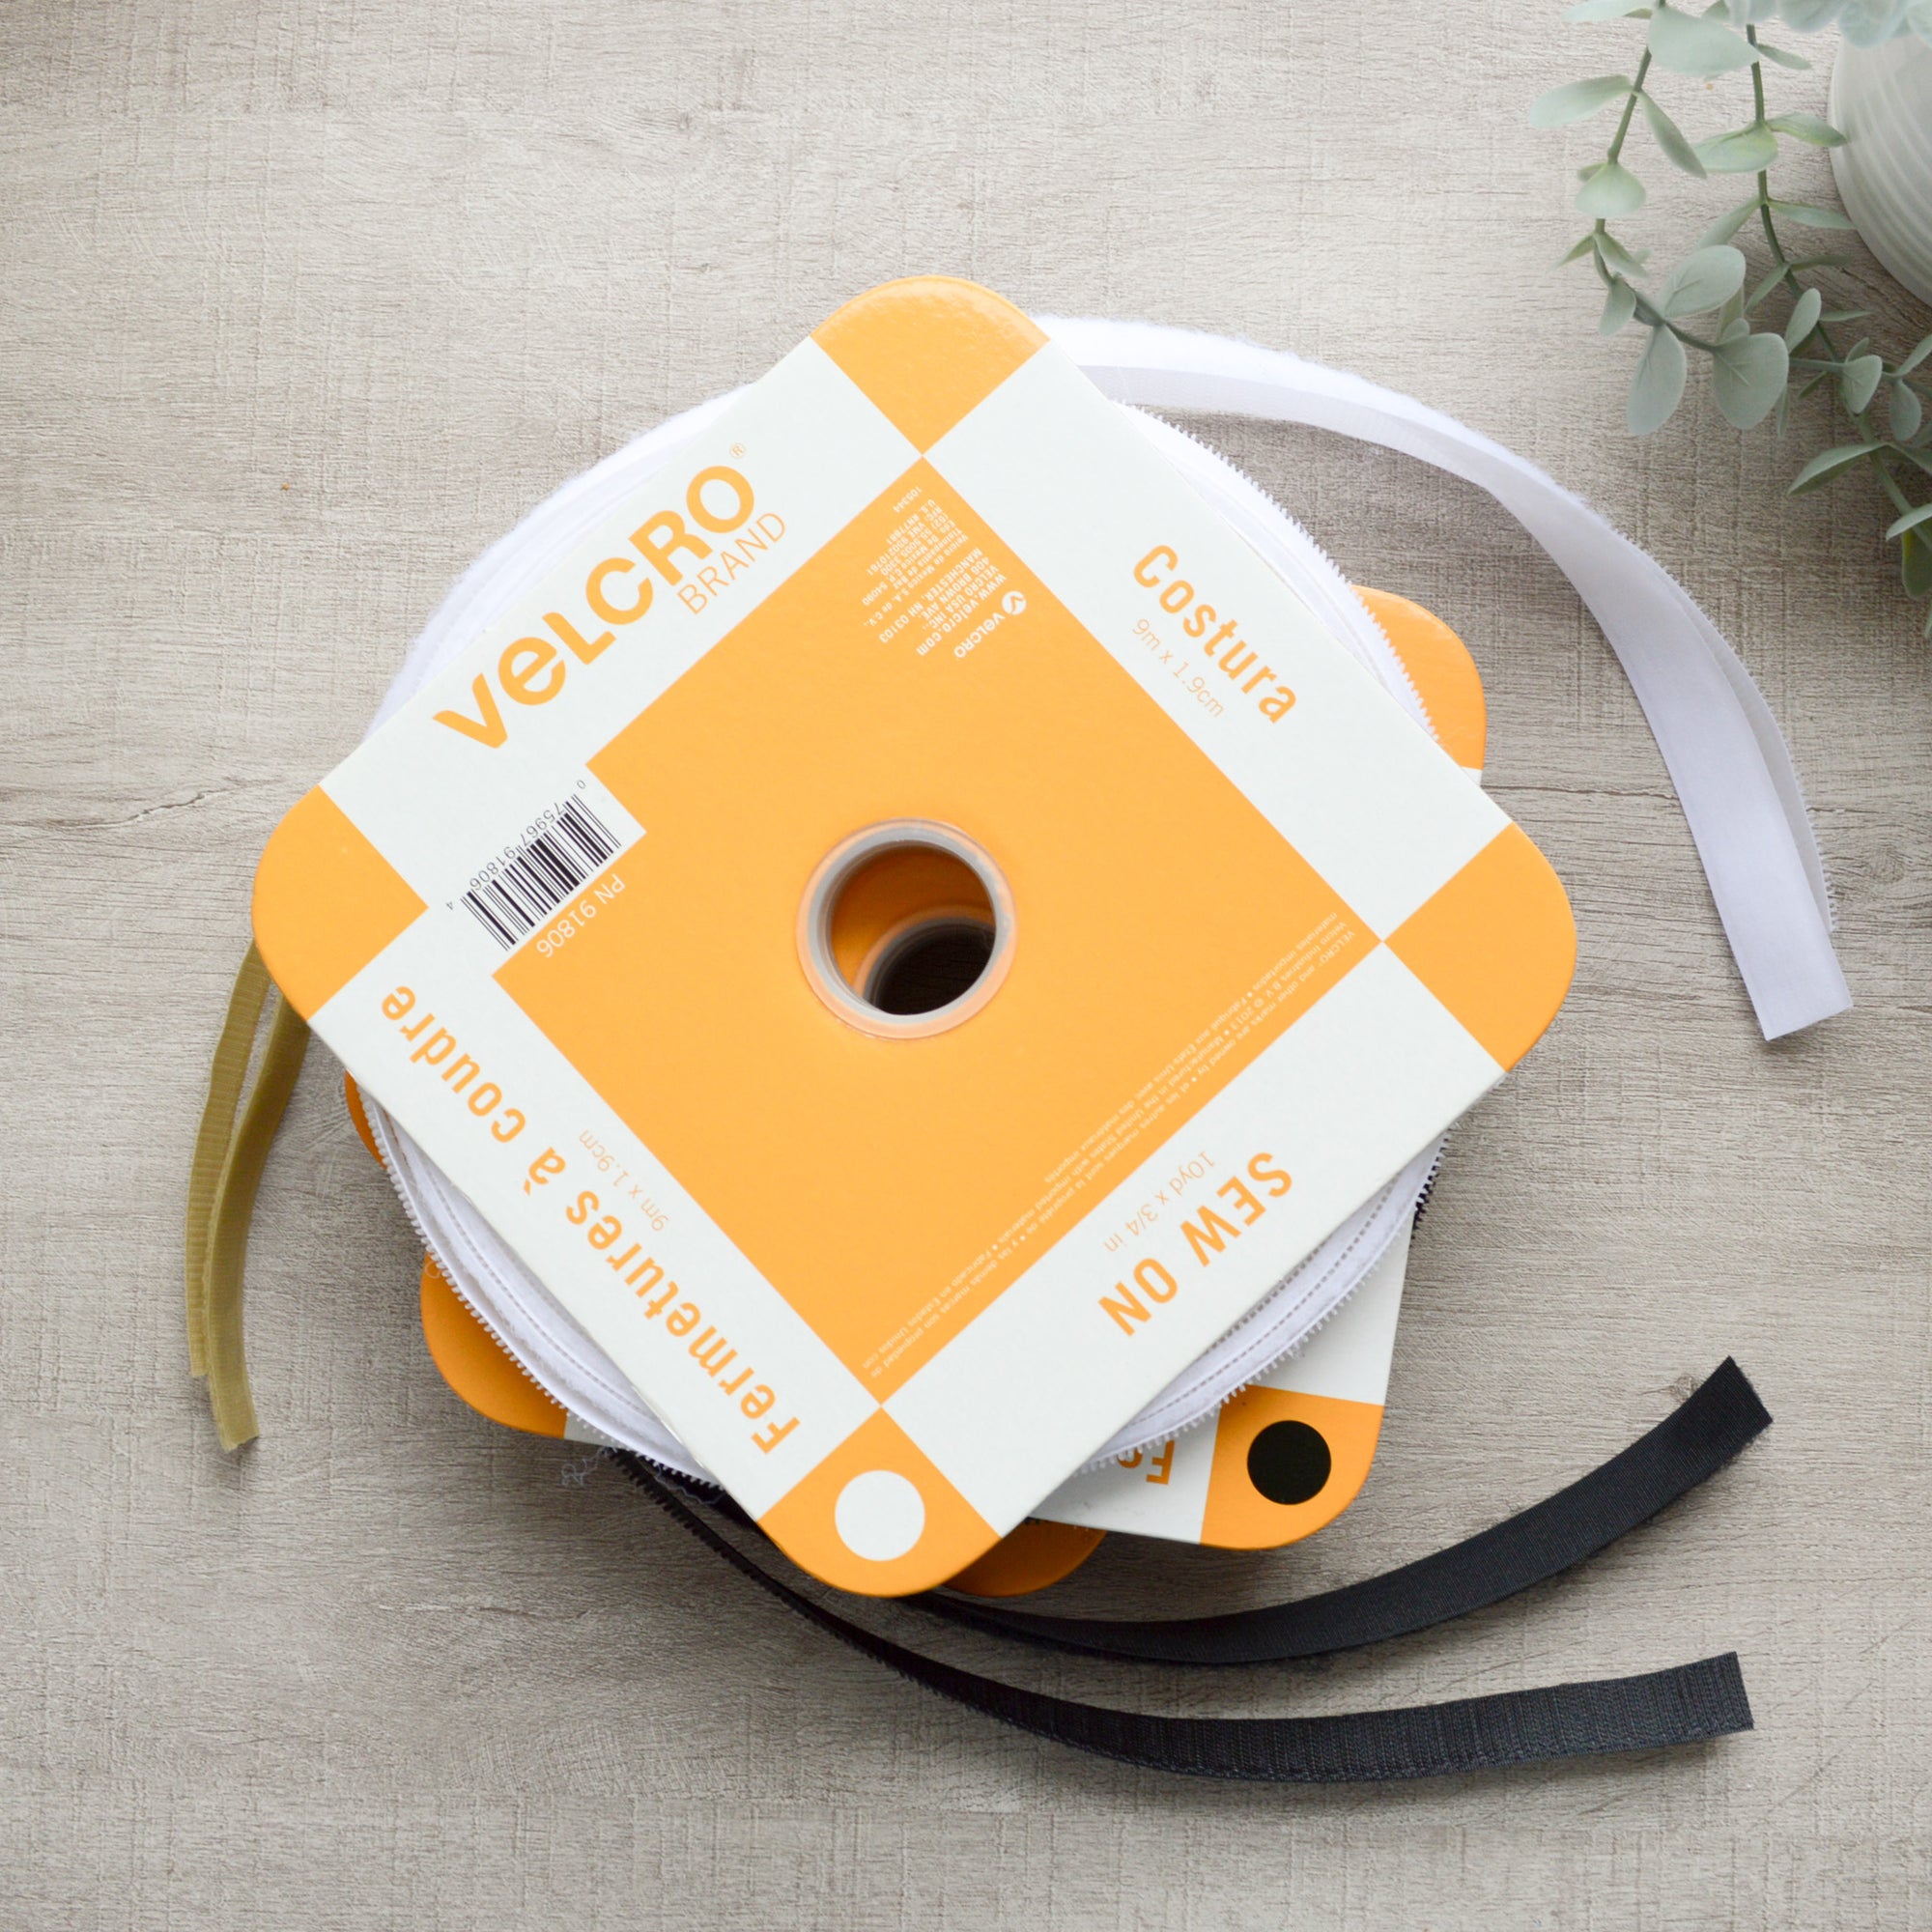 VELCRO Brand For Fabrics Sew On Soft and Flexible Tape No Ironing